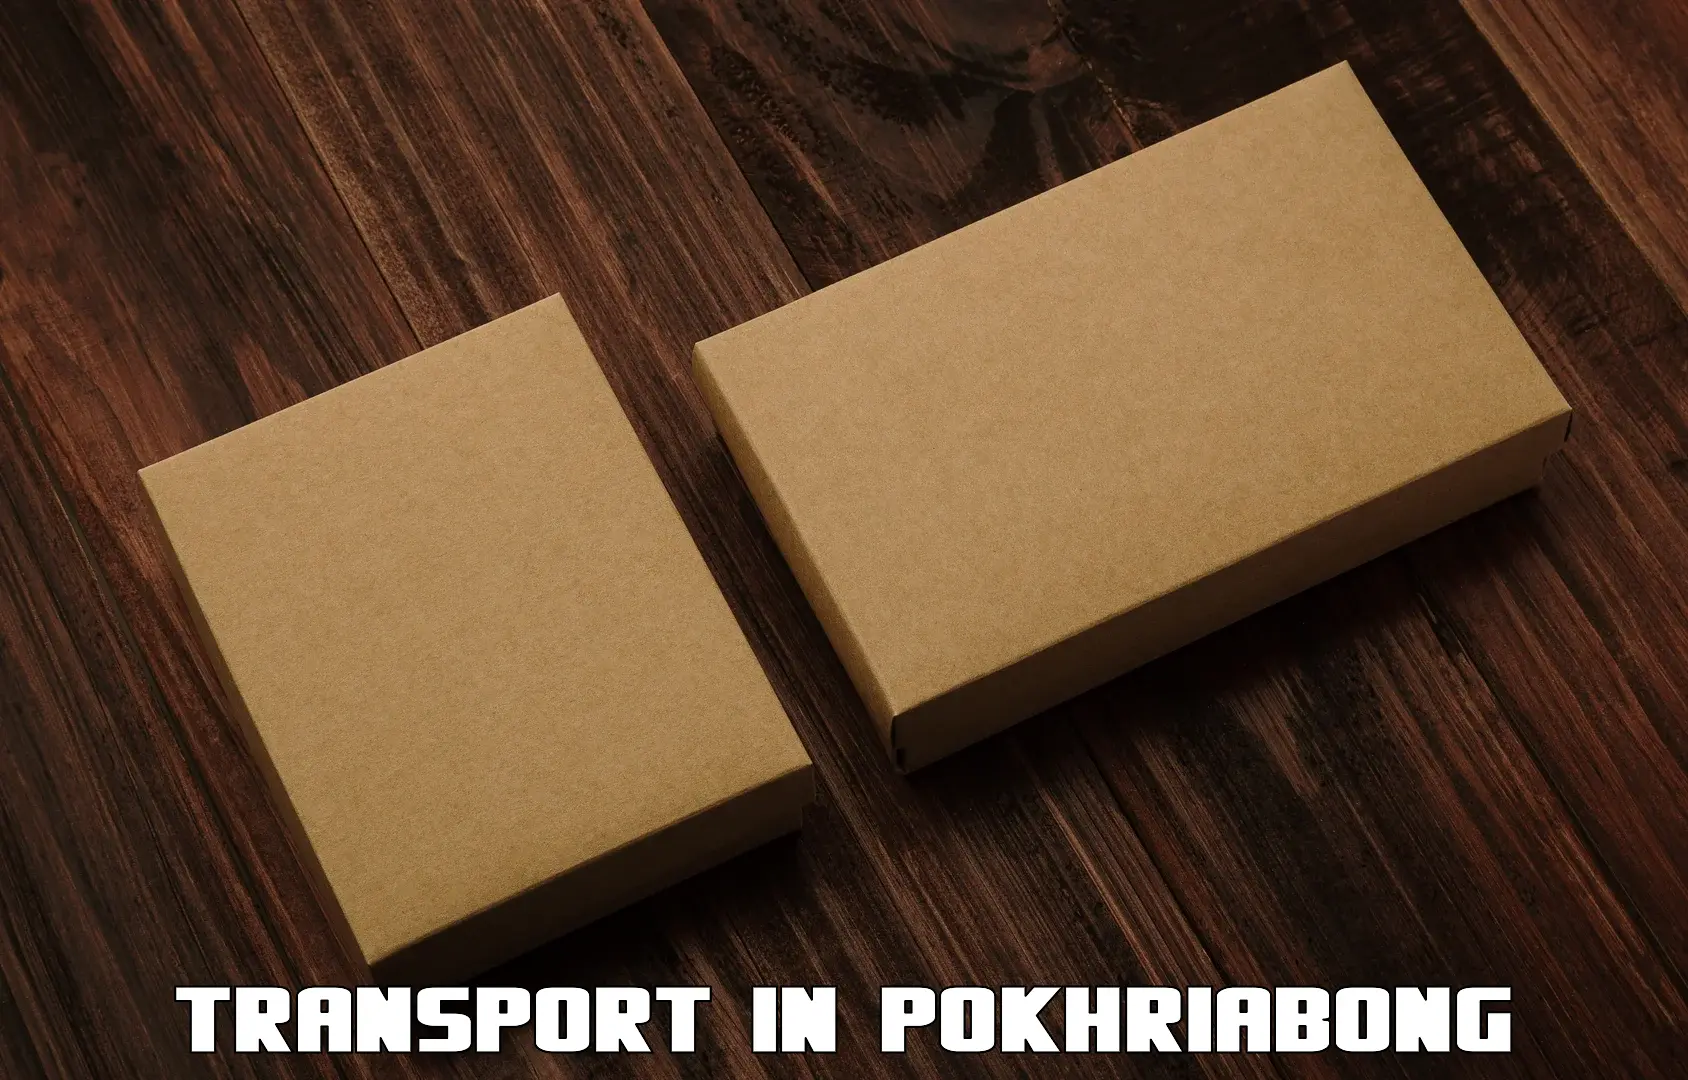 Air freight transport services in Pokhriabong